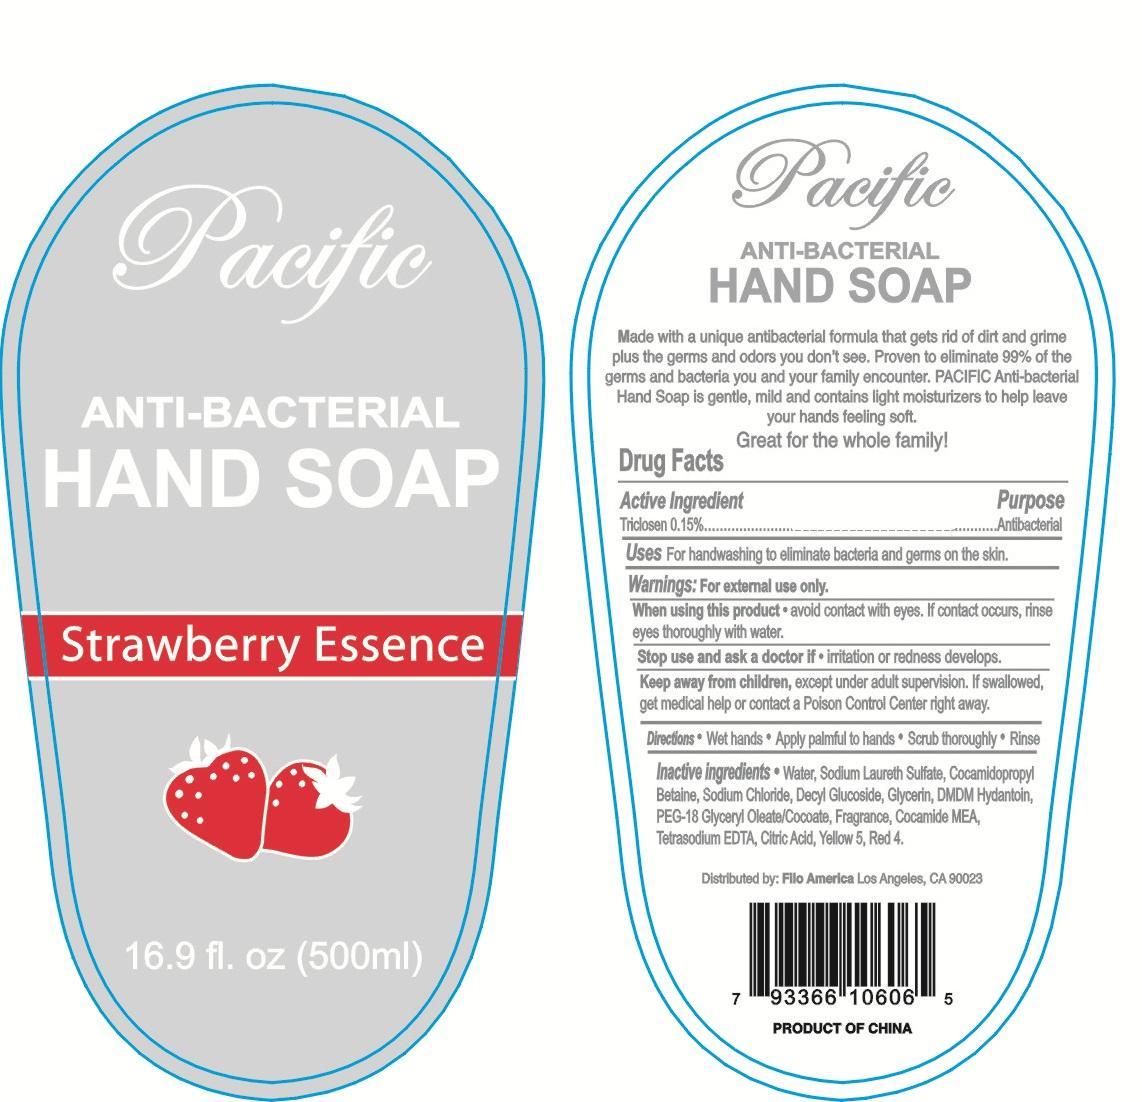 Pacific Anti-bacterial Hand Cleanse Strawberry Essence | Triclosan Gel Breastfeeding